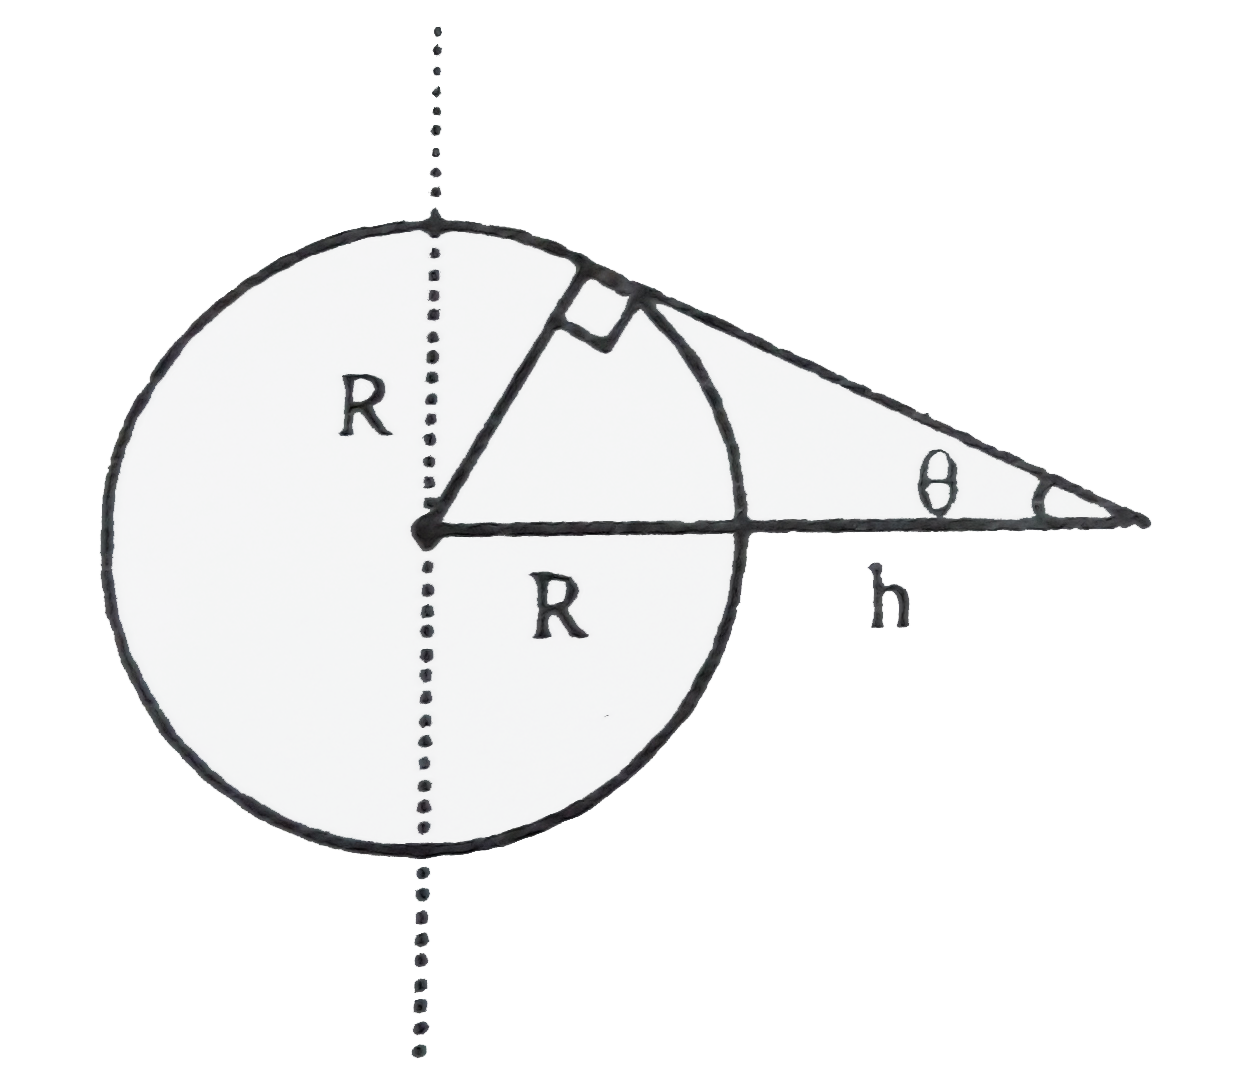 A geostationary satellite is at a height h above the surface of earth. If earth radius is R-